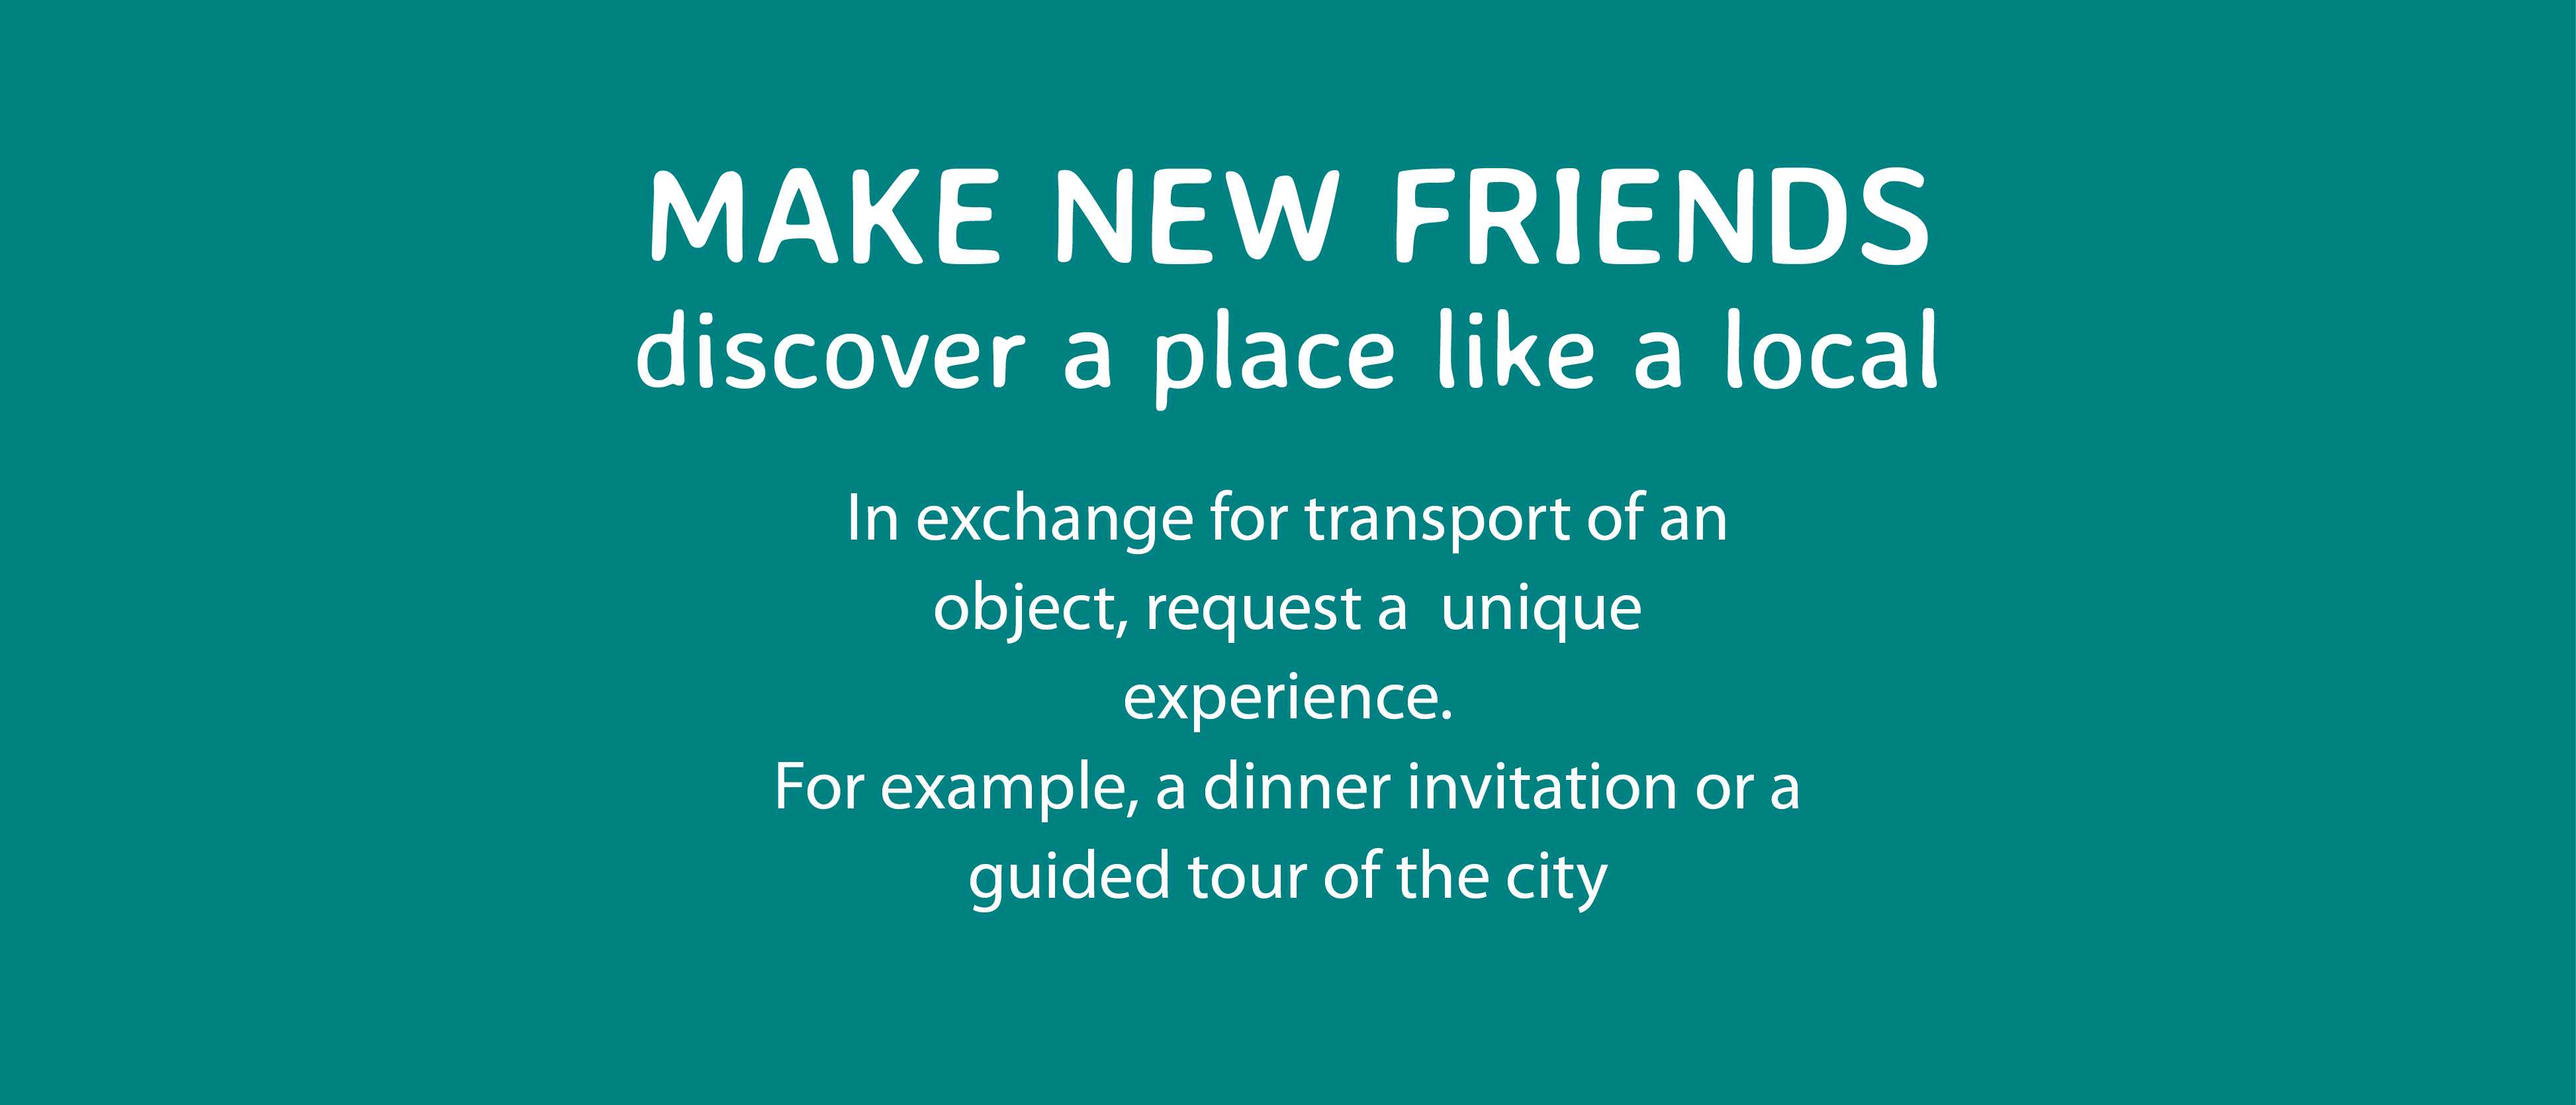 make-new-friends-discover-places-like-locals-svector-social-vector